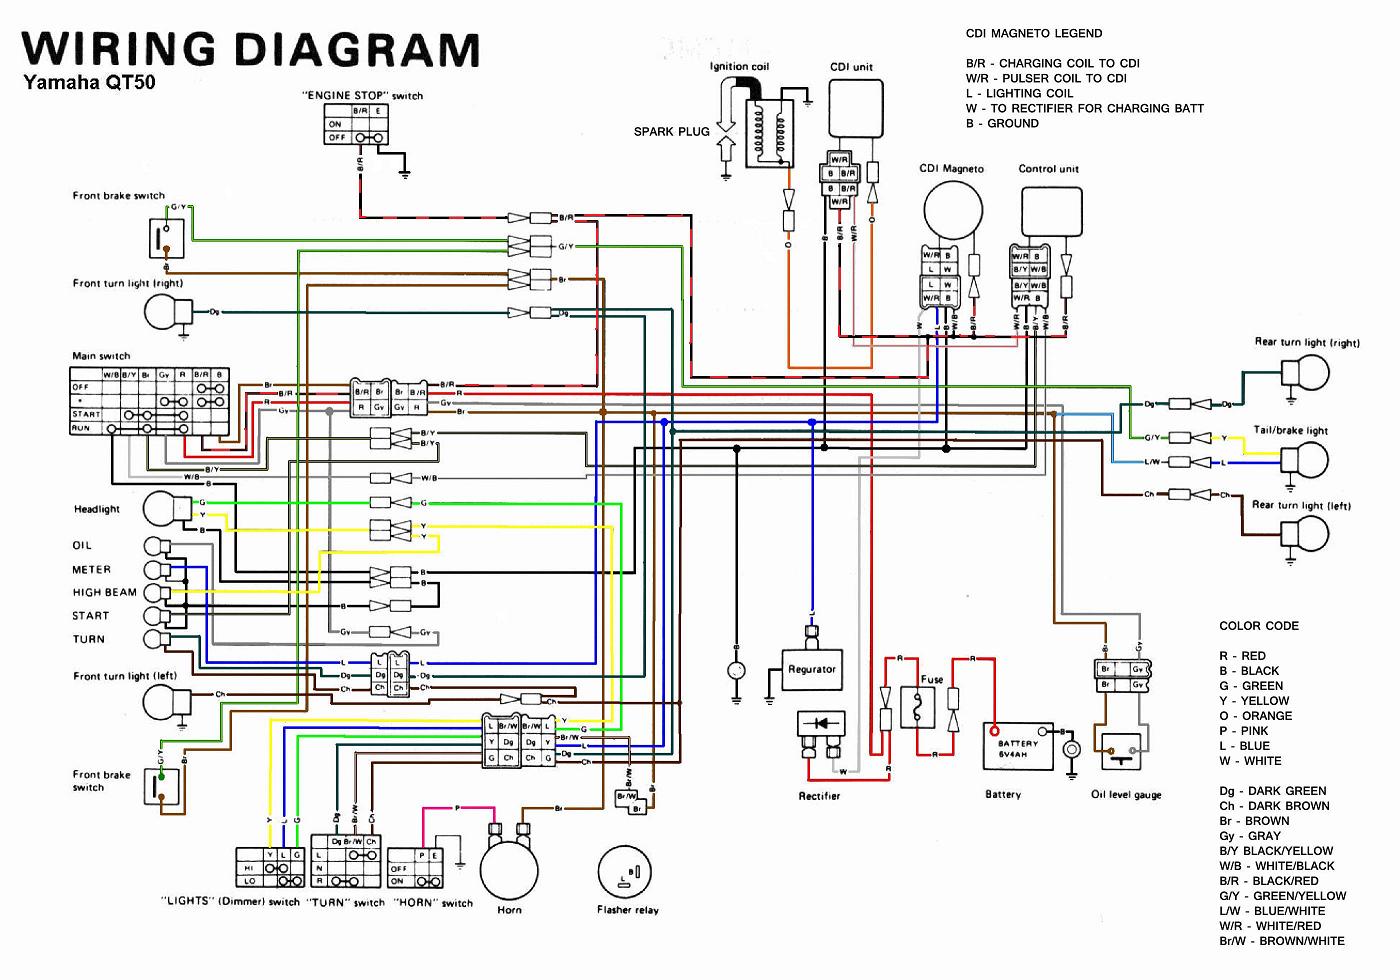 wiring diagram for a gas gas pampara motorcycle 2002